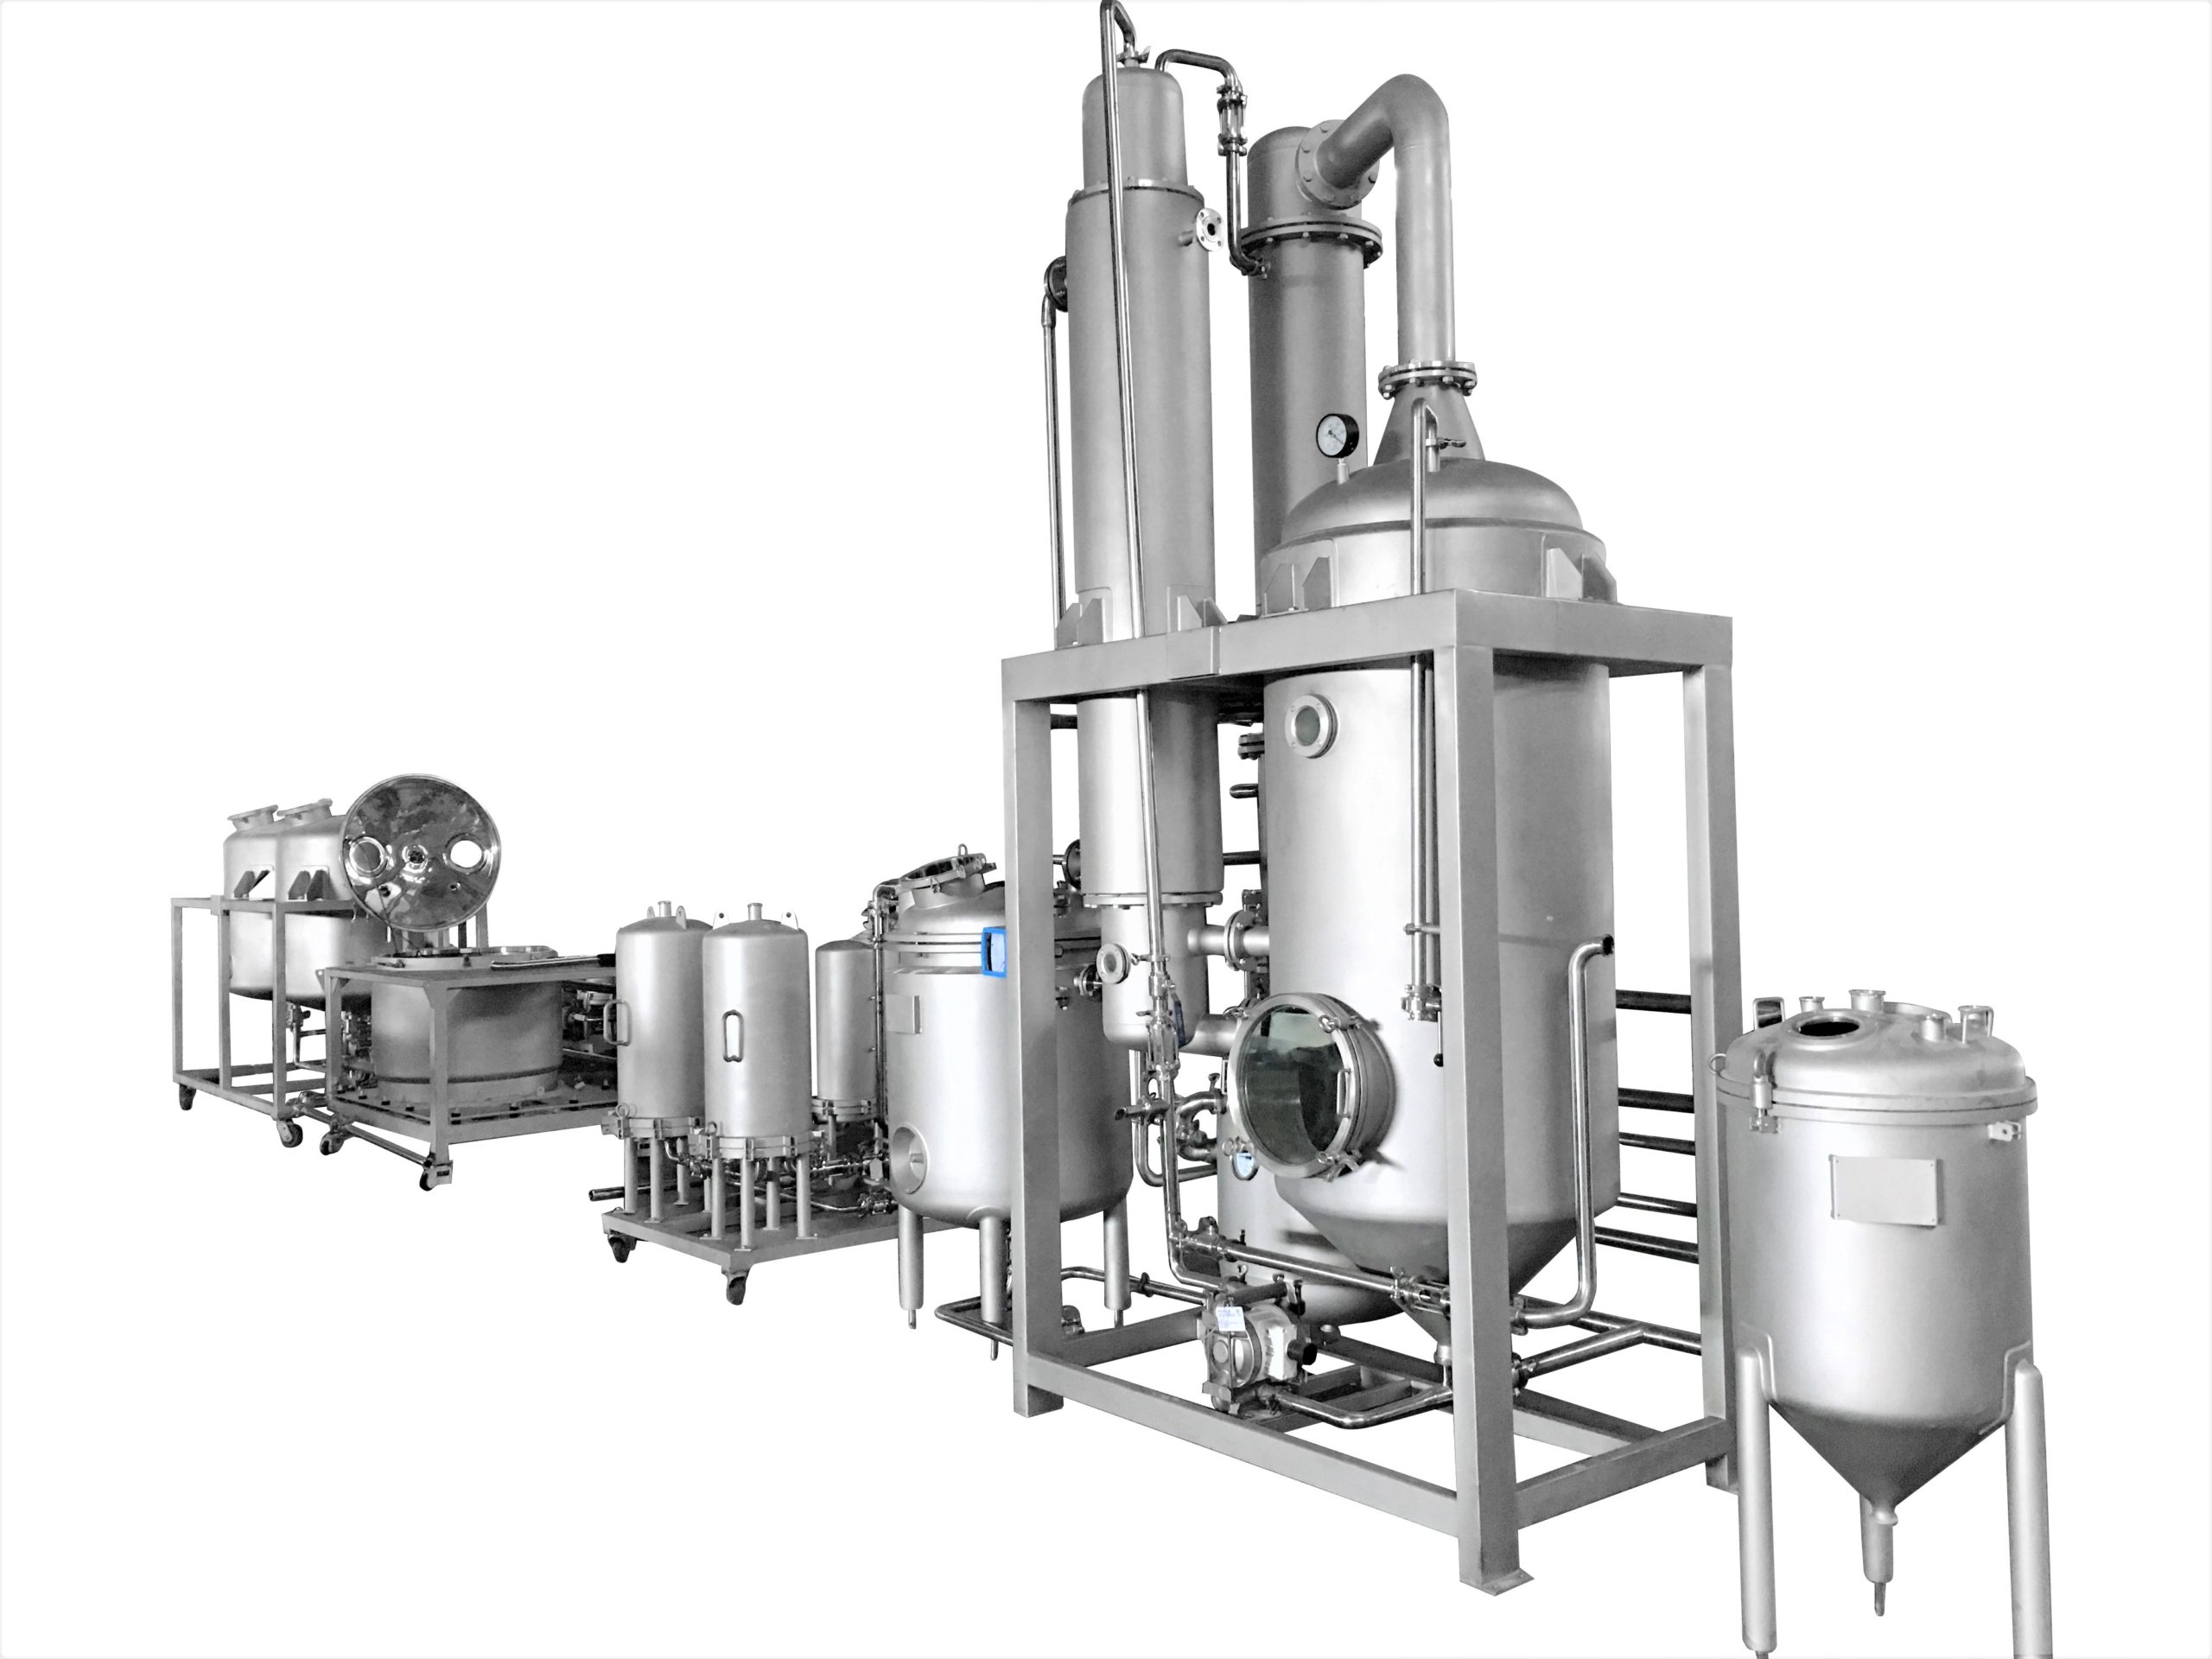 Essential Oil Extraction Machine. Quality Extraction Equipment